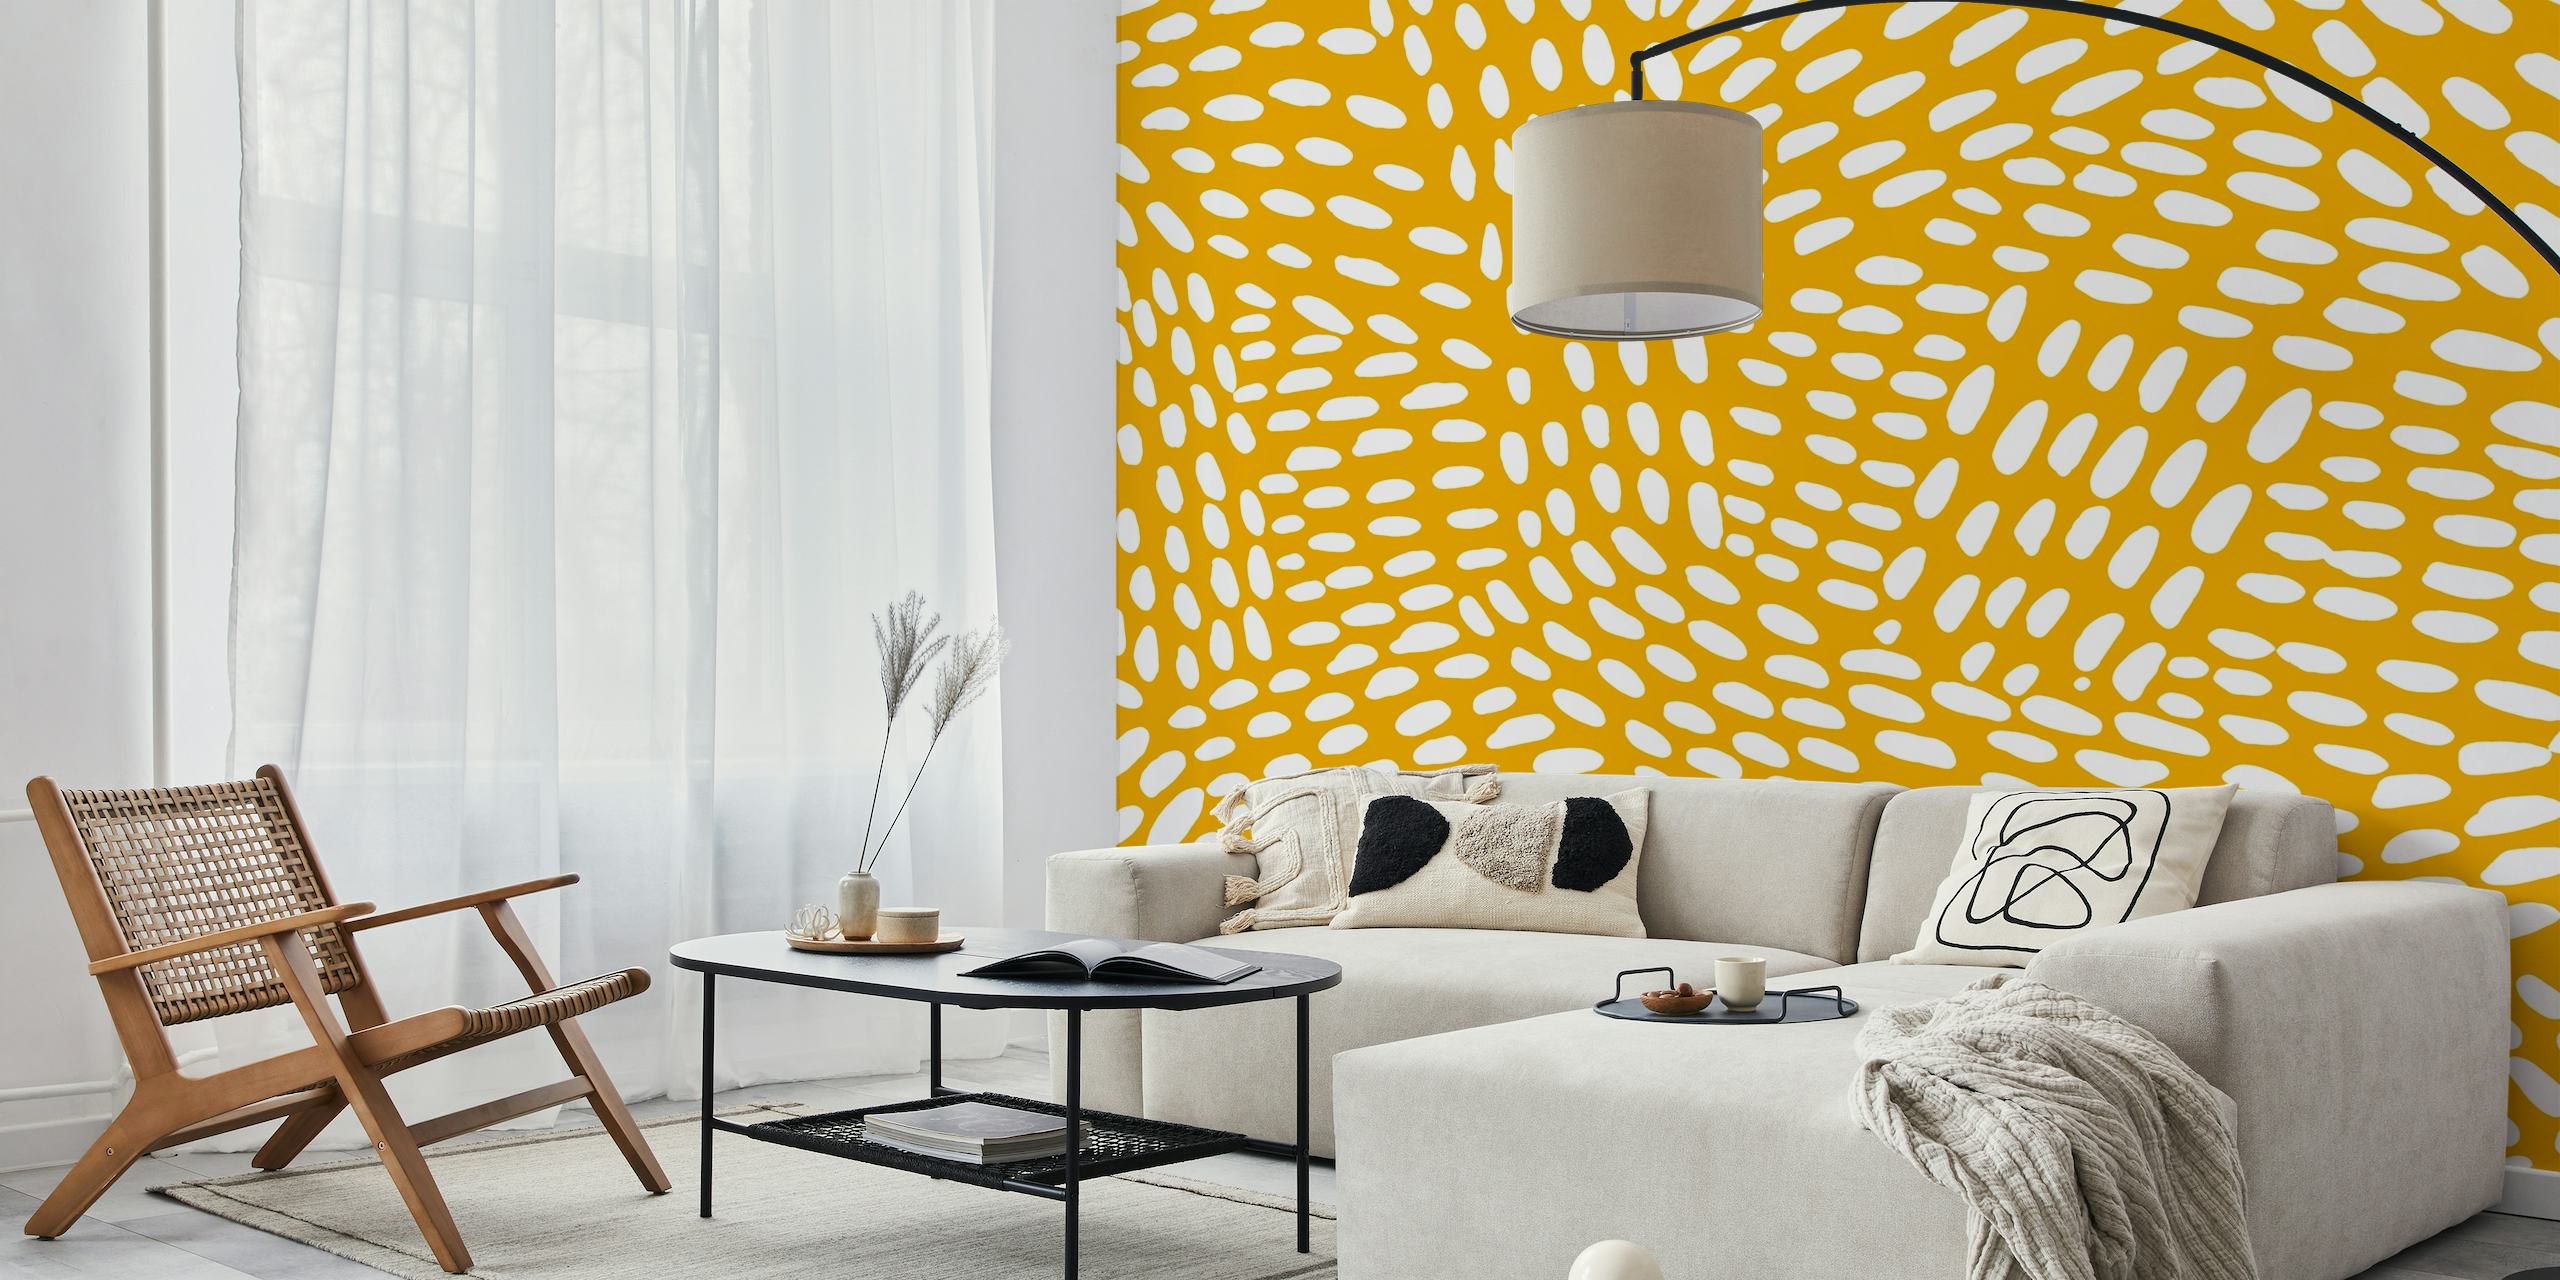 Dotted lines on ochre wallpaper